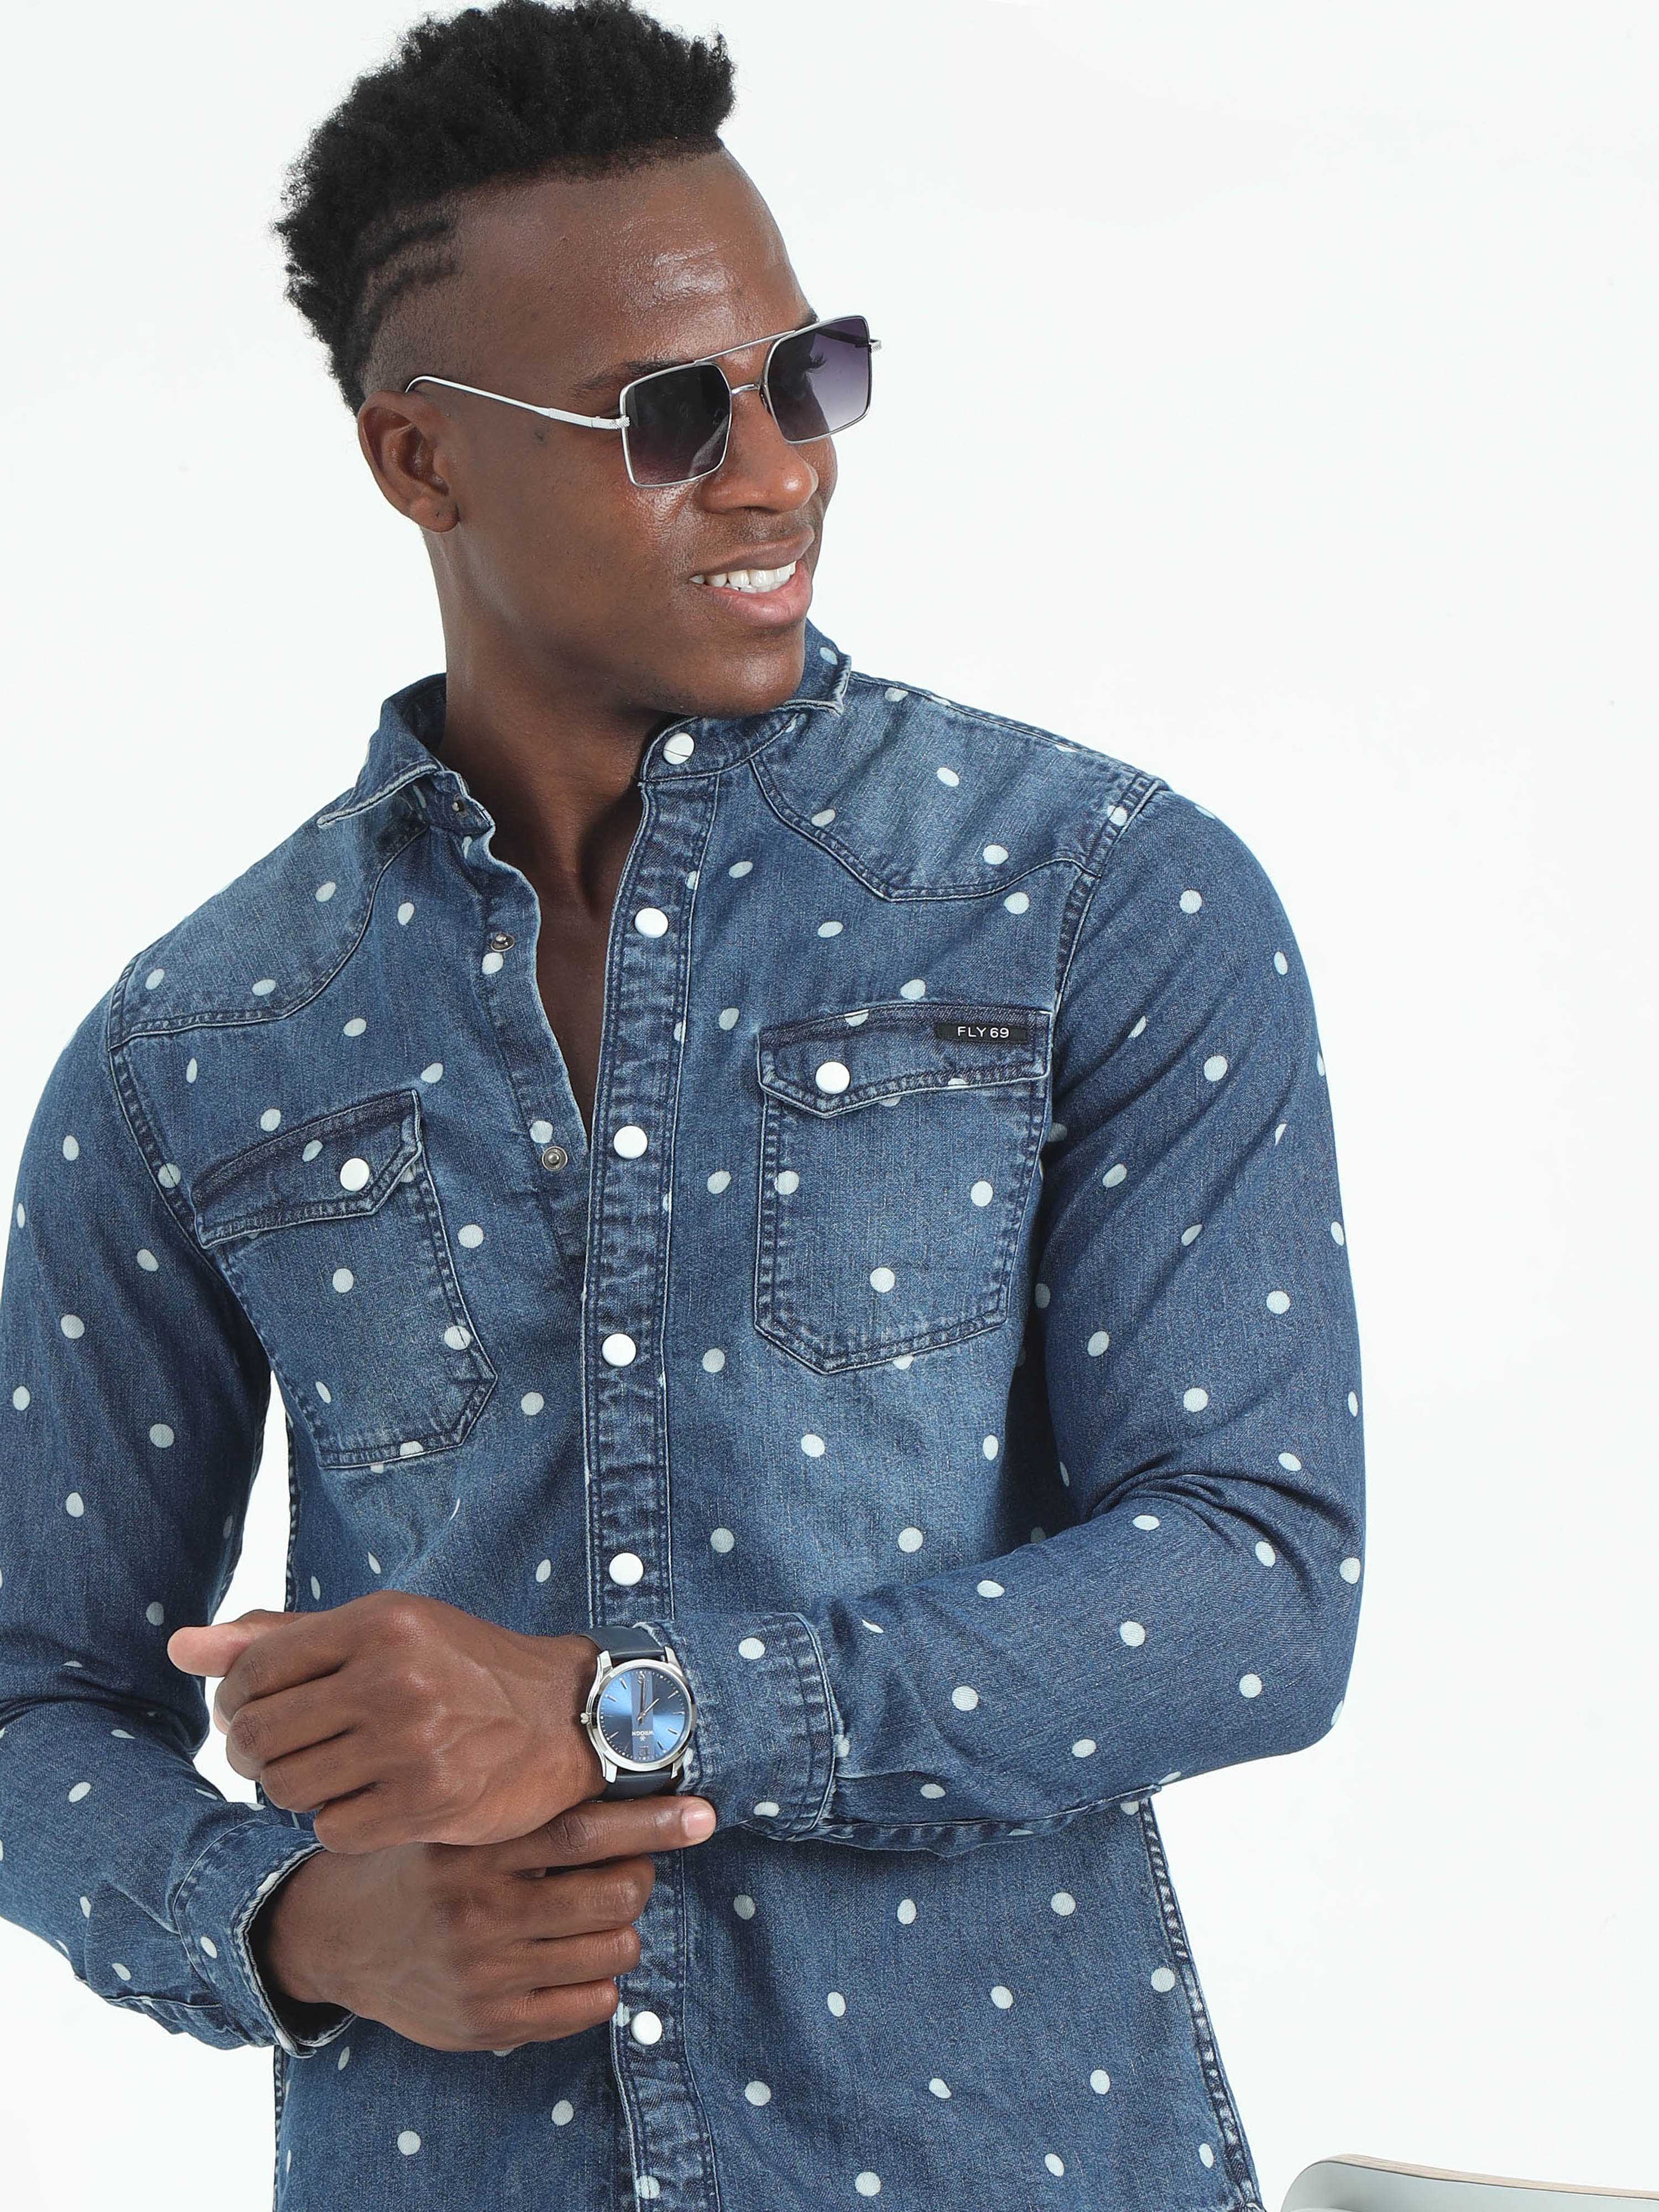 How To Wear A Denim Shirt – Men's Outfits & Style Tips